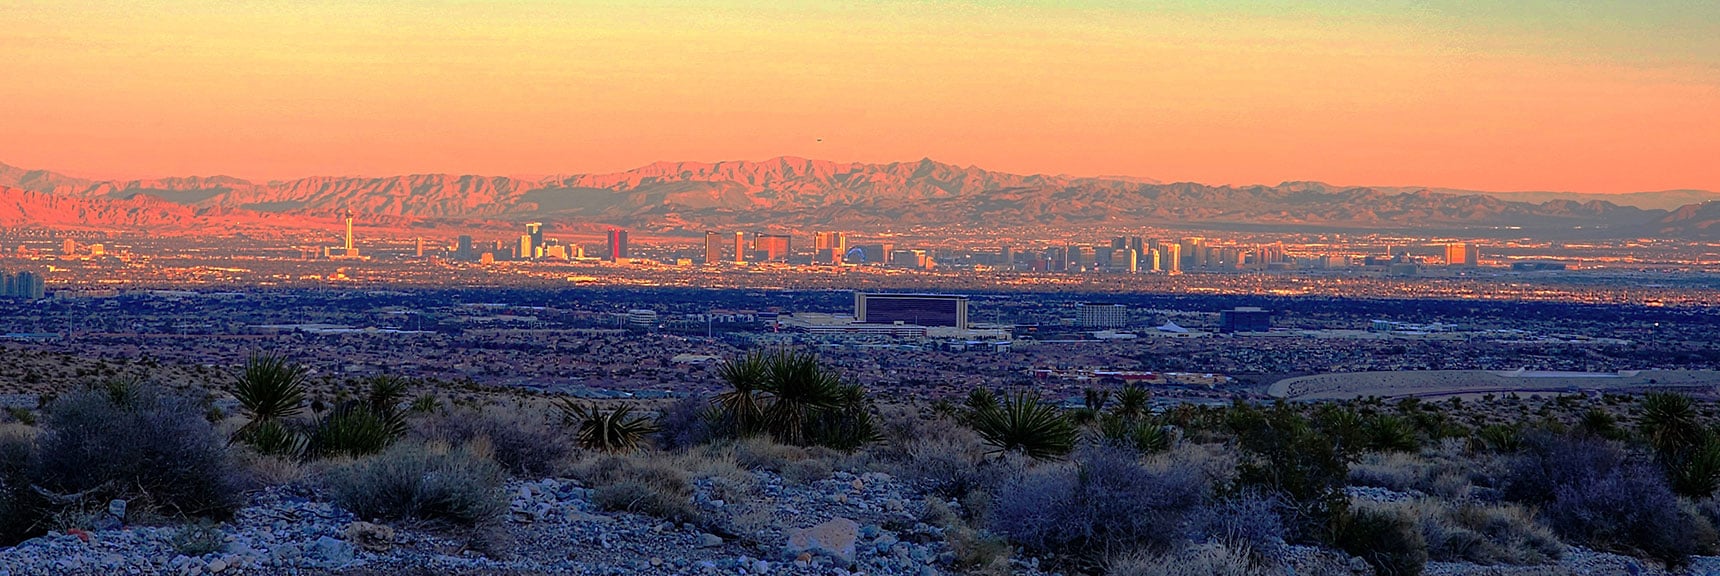 Sunset View of Vegas Strip and Beyond | 3 Basin Circuit | Calico Basin, Brownstone Basin, Red Rock Canyon, Nevada